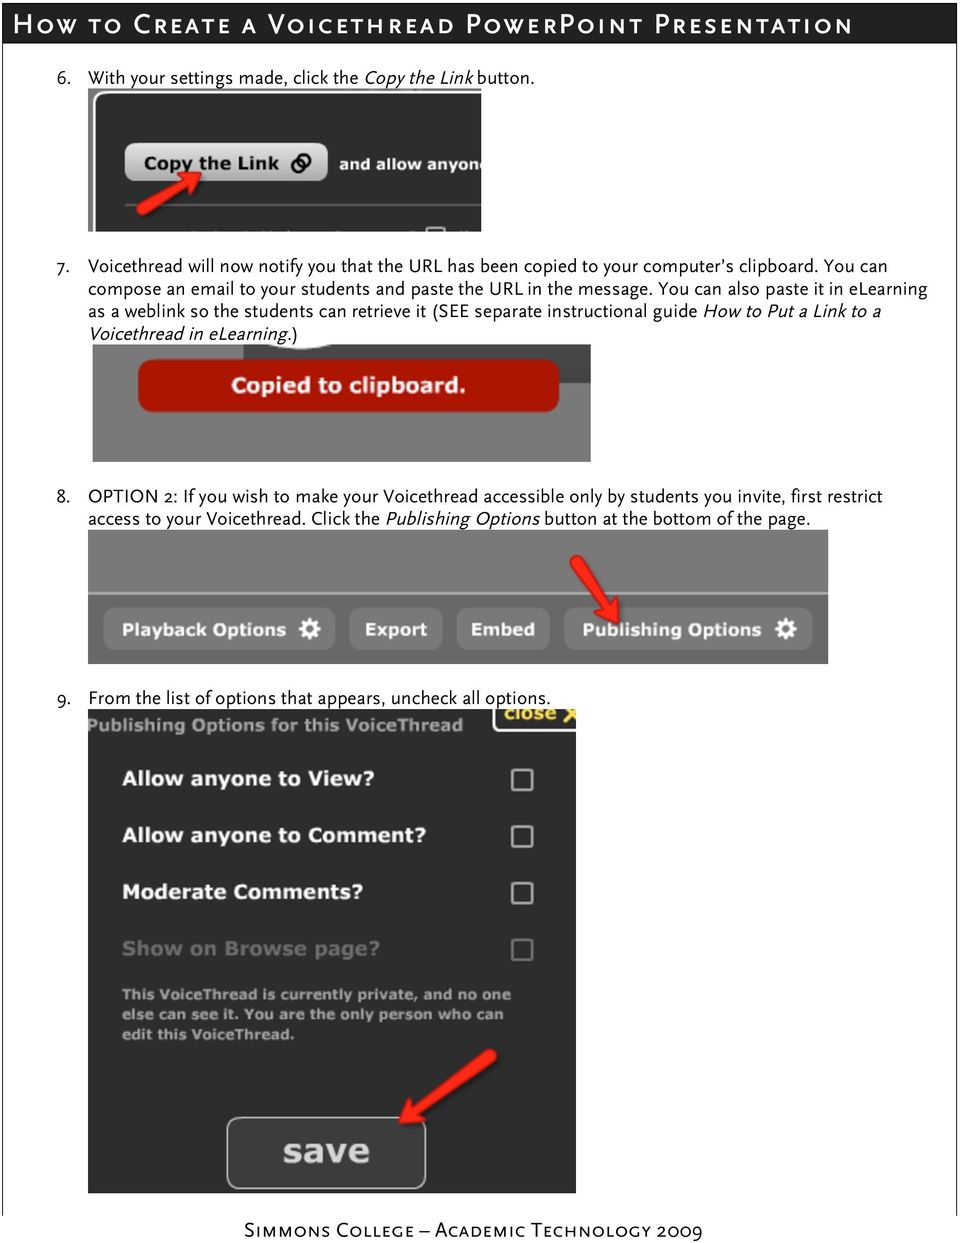 You can also paste it in elearning as a weblink so the students can retrieve it (SEE separate instructional guide How to Put a Link to a Voicethread in elearning.